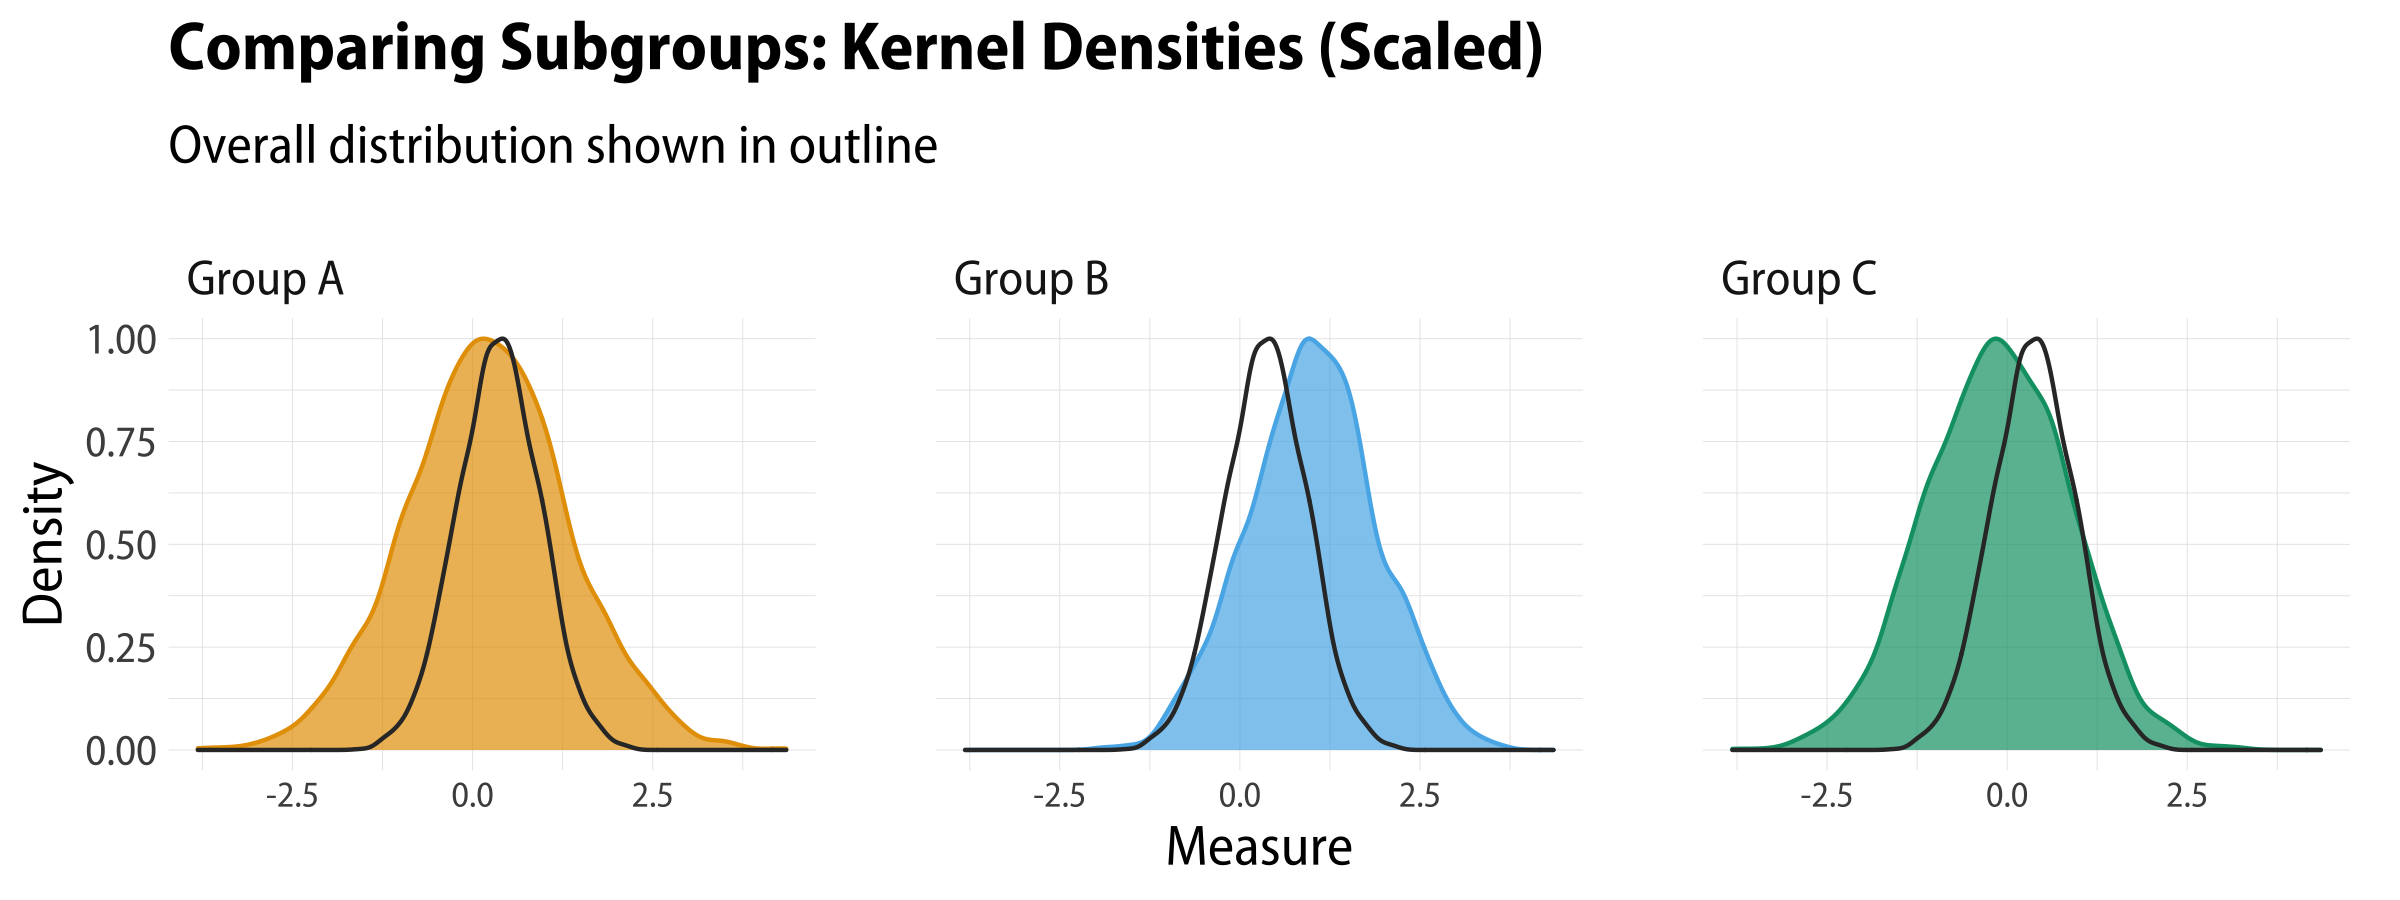 Kernel densities with an outline reference distribution (scaled).